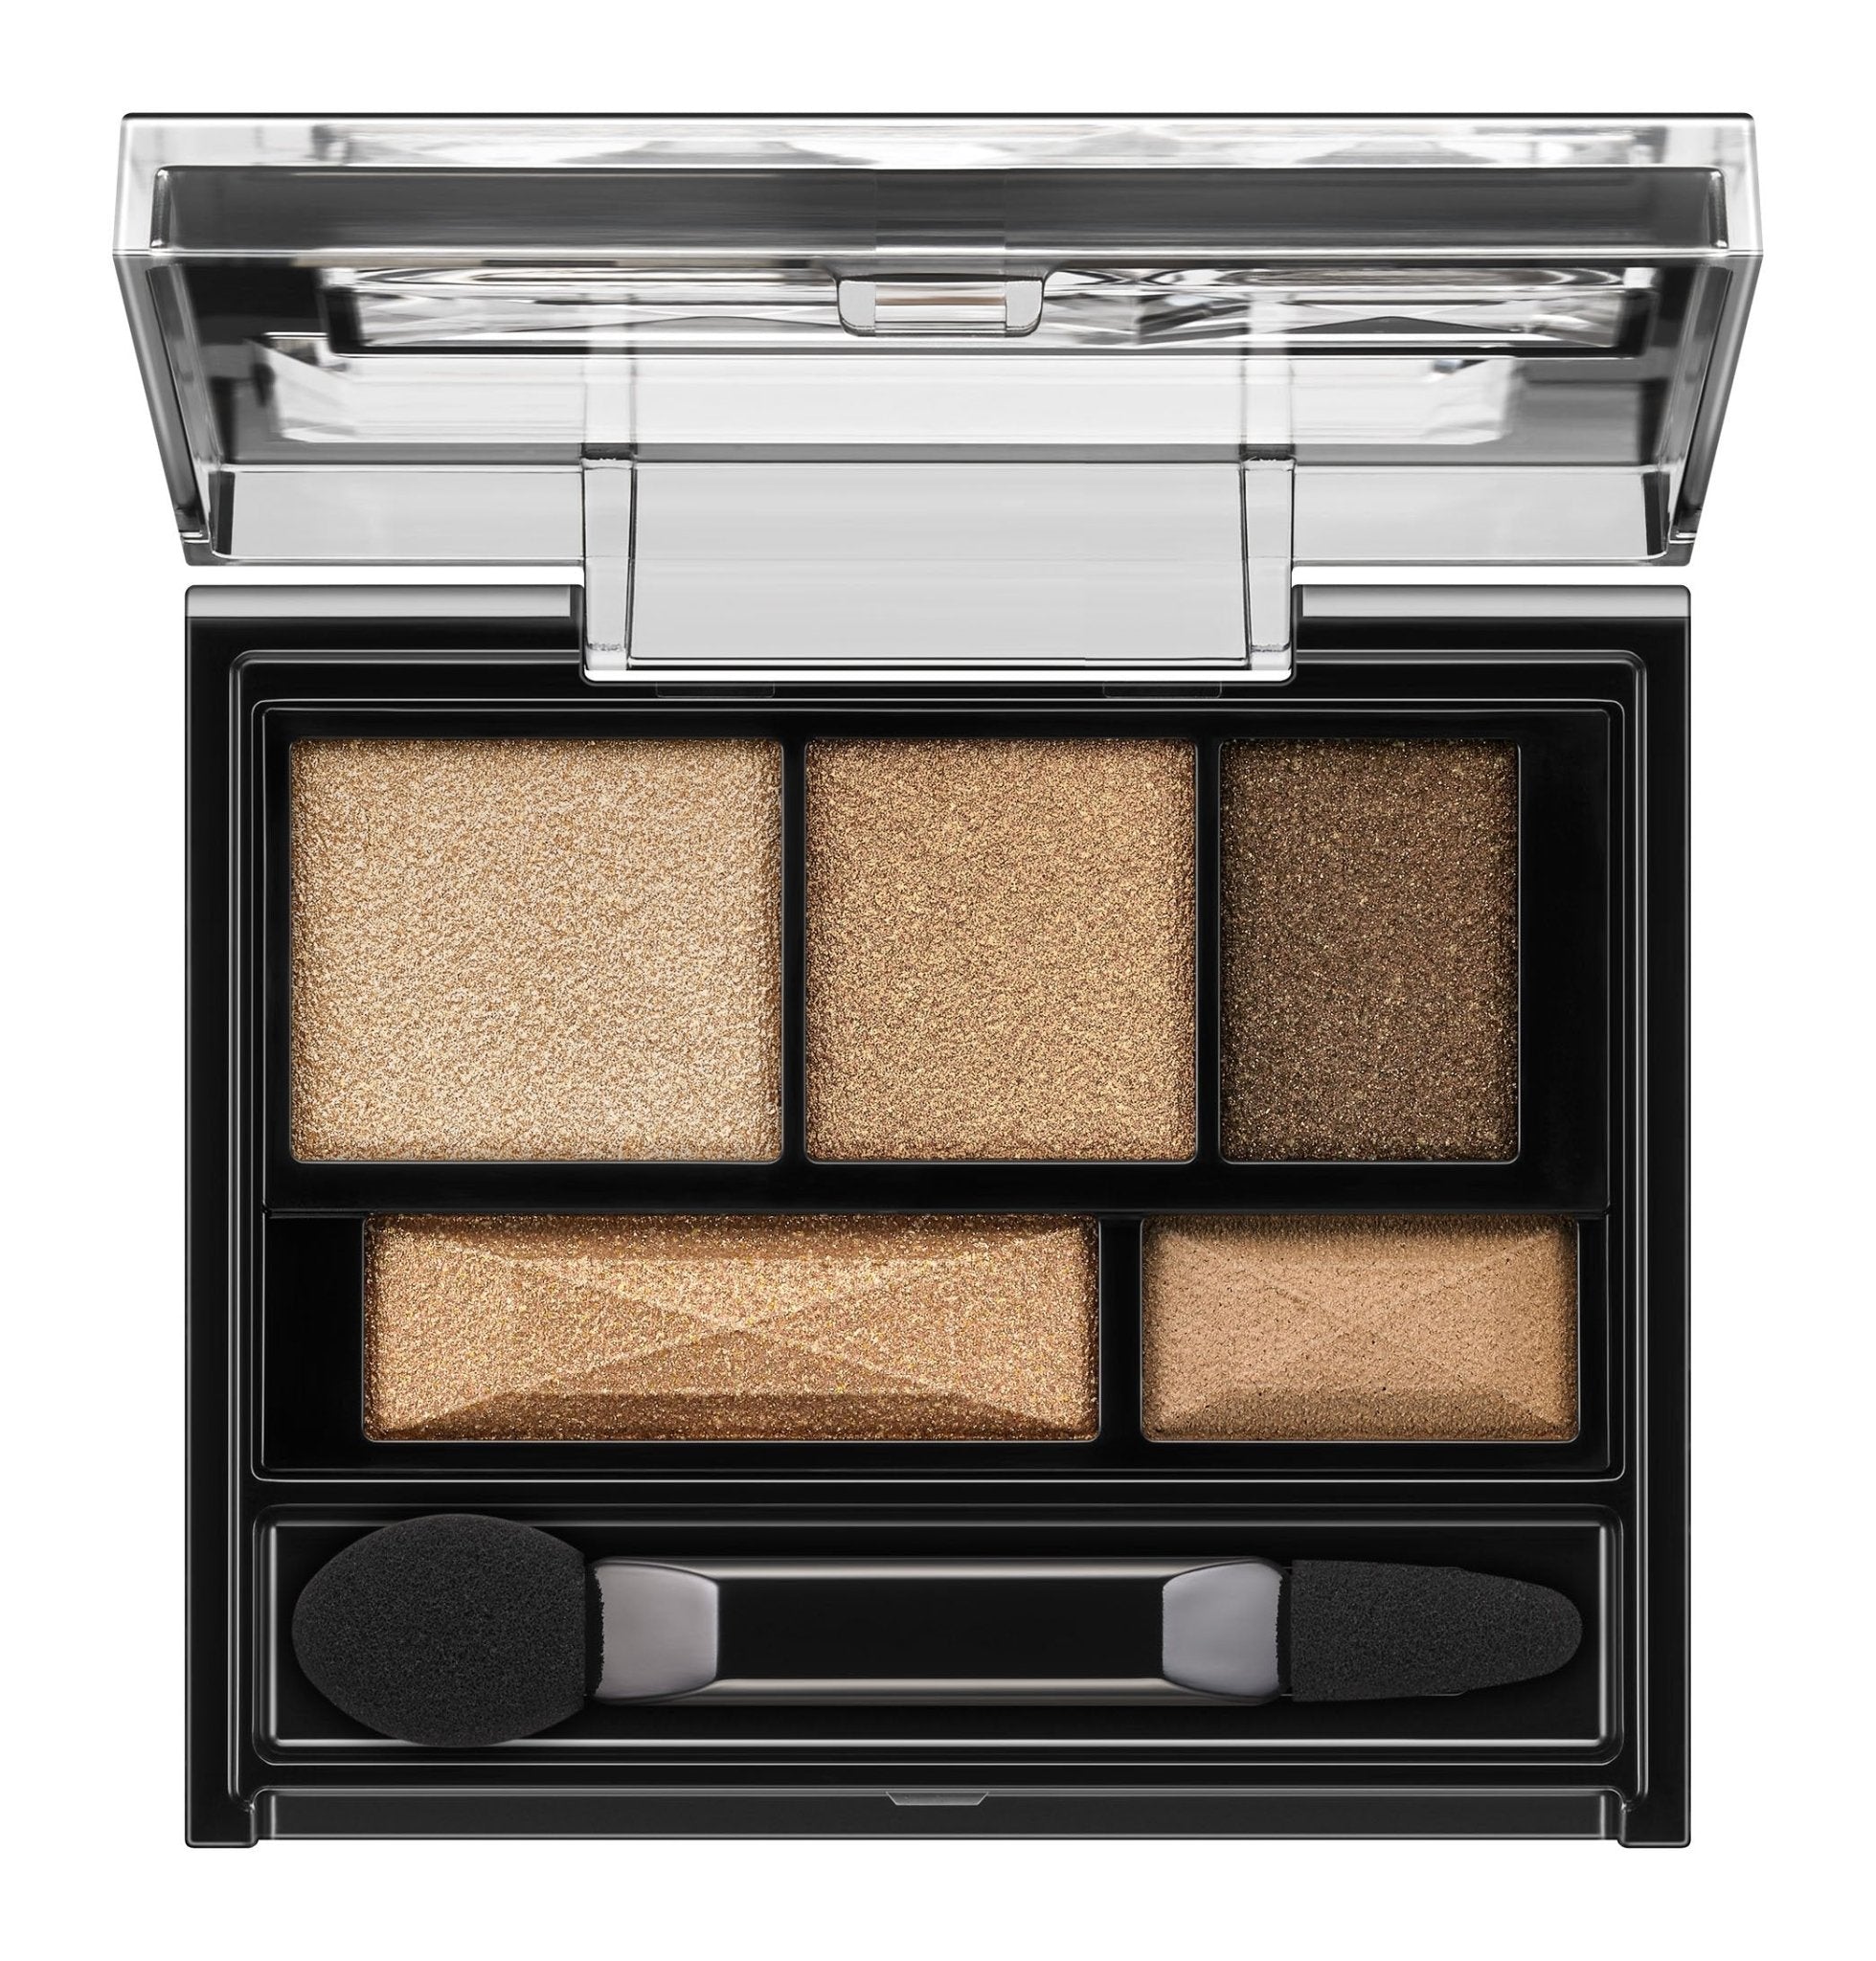 Kate Purley Brown Shade BR - 1 Eyeshadow for Stunning Eyes